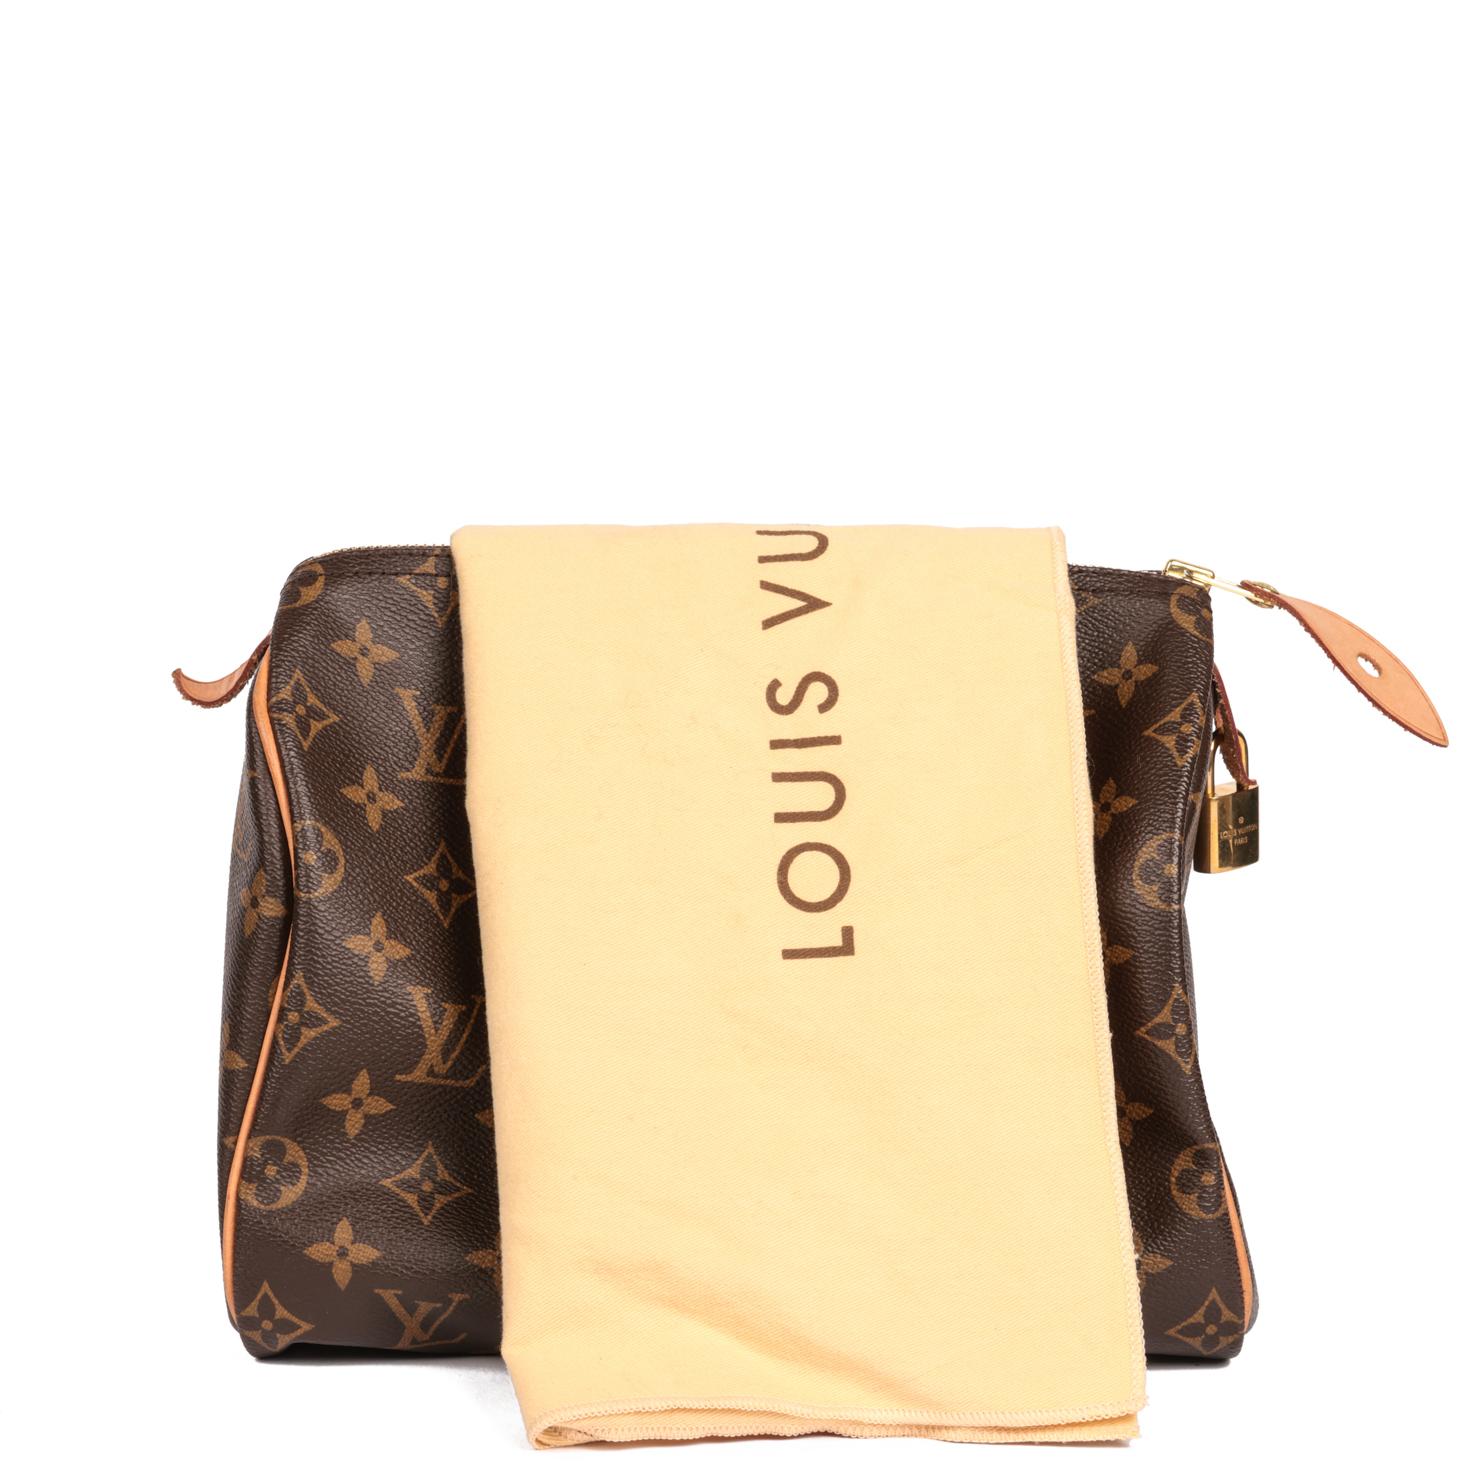 LOUIS VUITTON Brown Monogram Coated Canvas & Vacehtta Leather Speedy 25 6